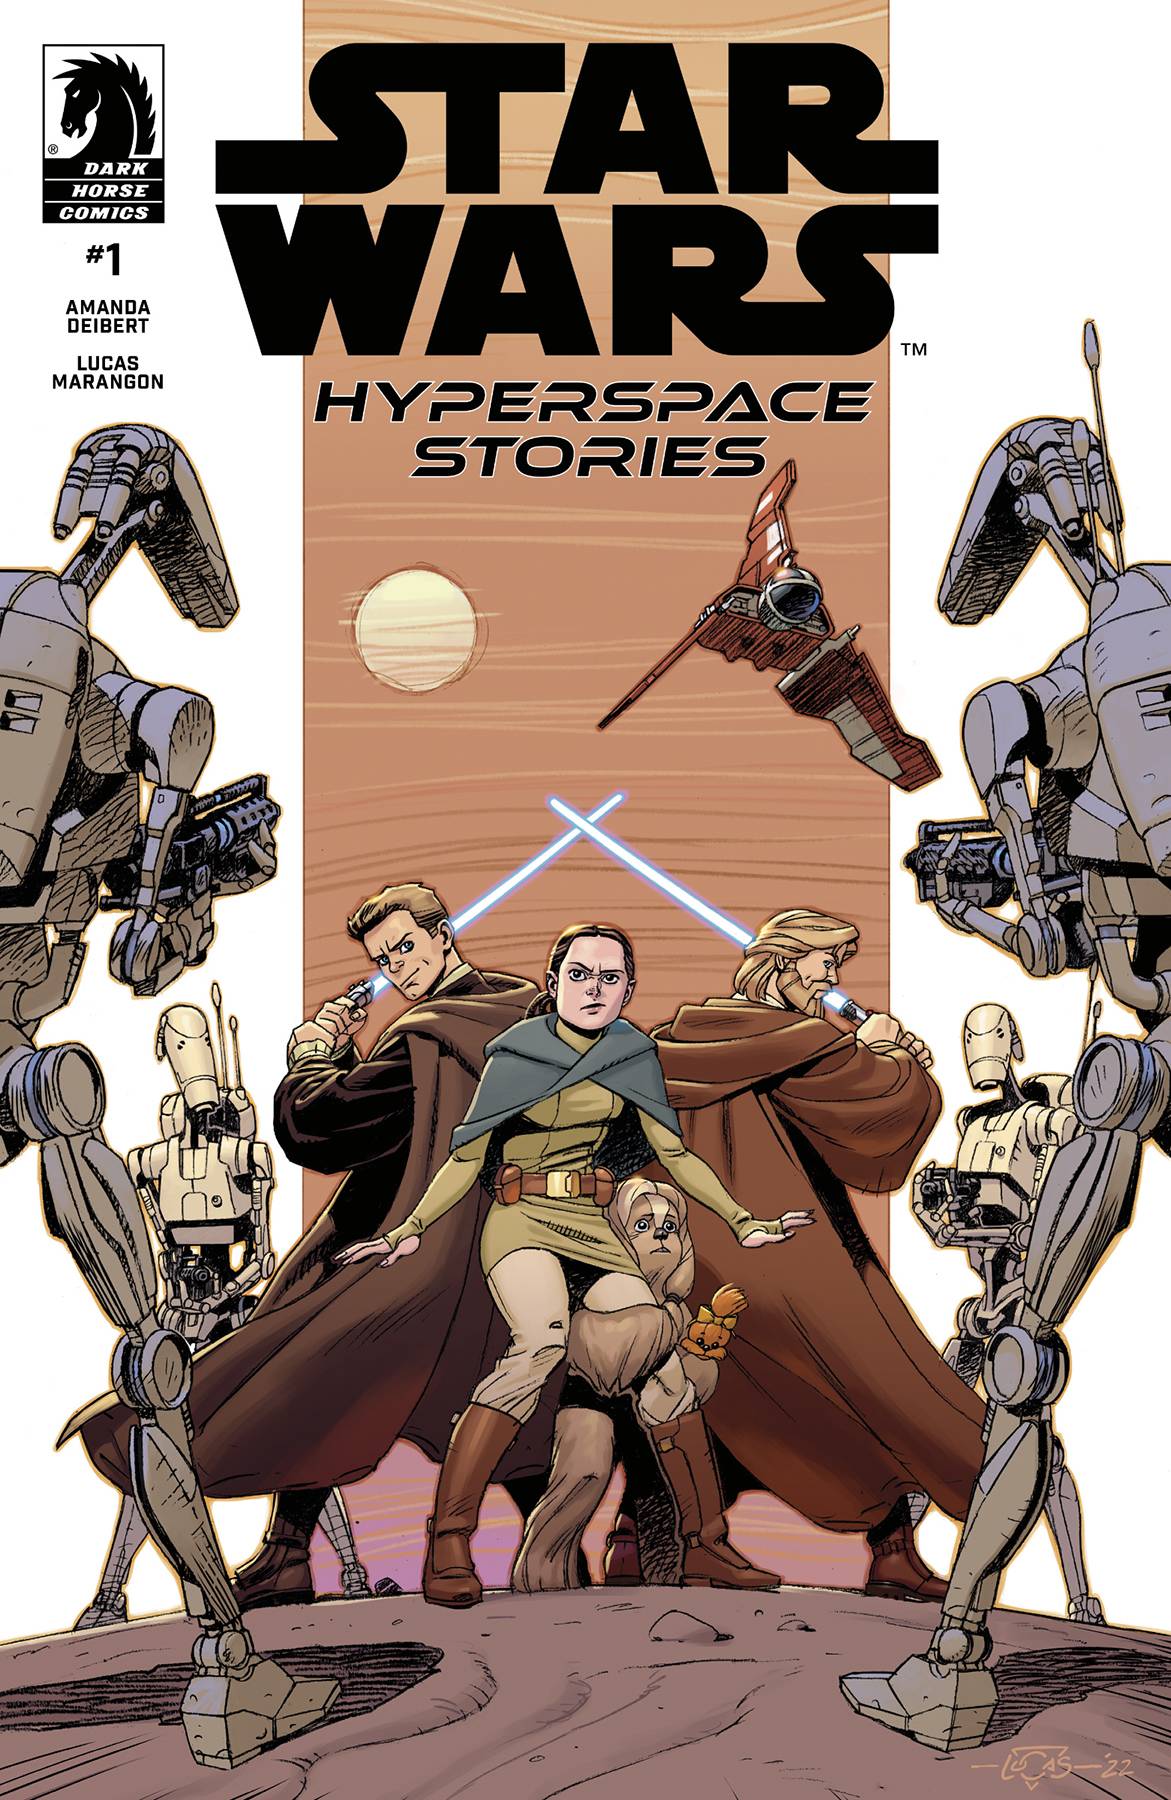 STAR WARS HYPERSPACE STORIES #1 COVER A MARANGON